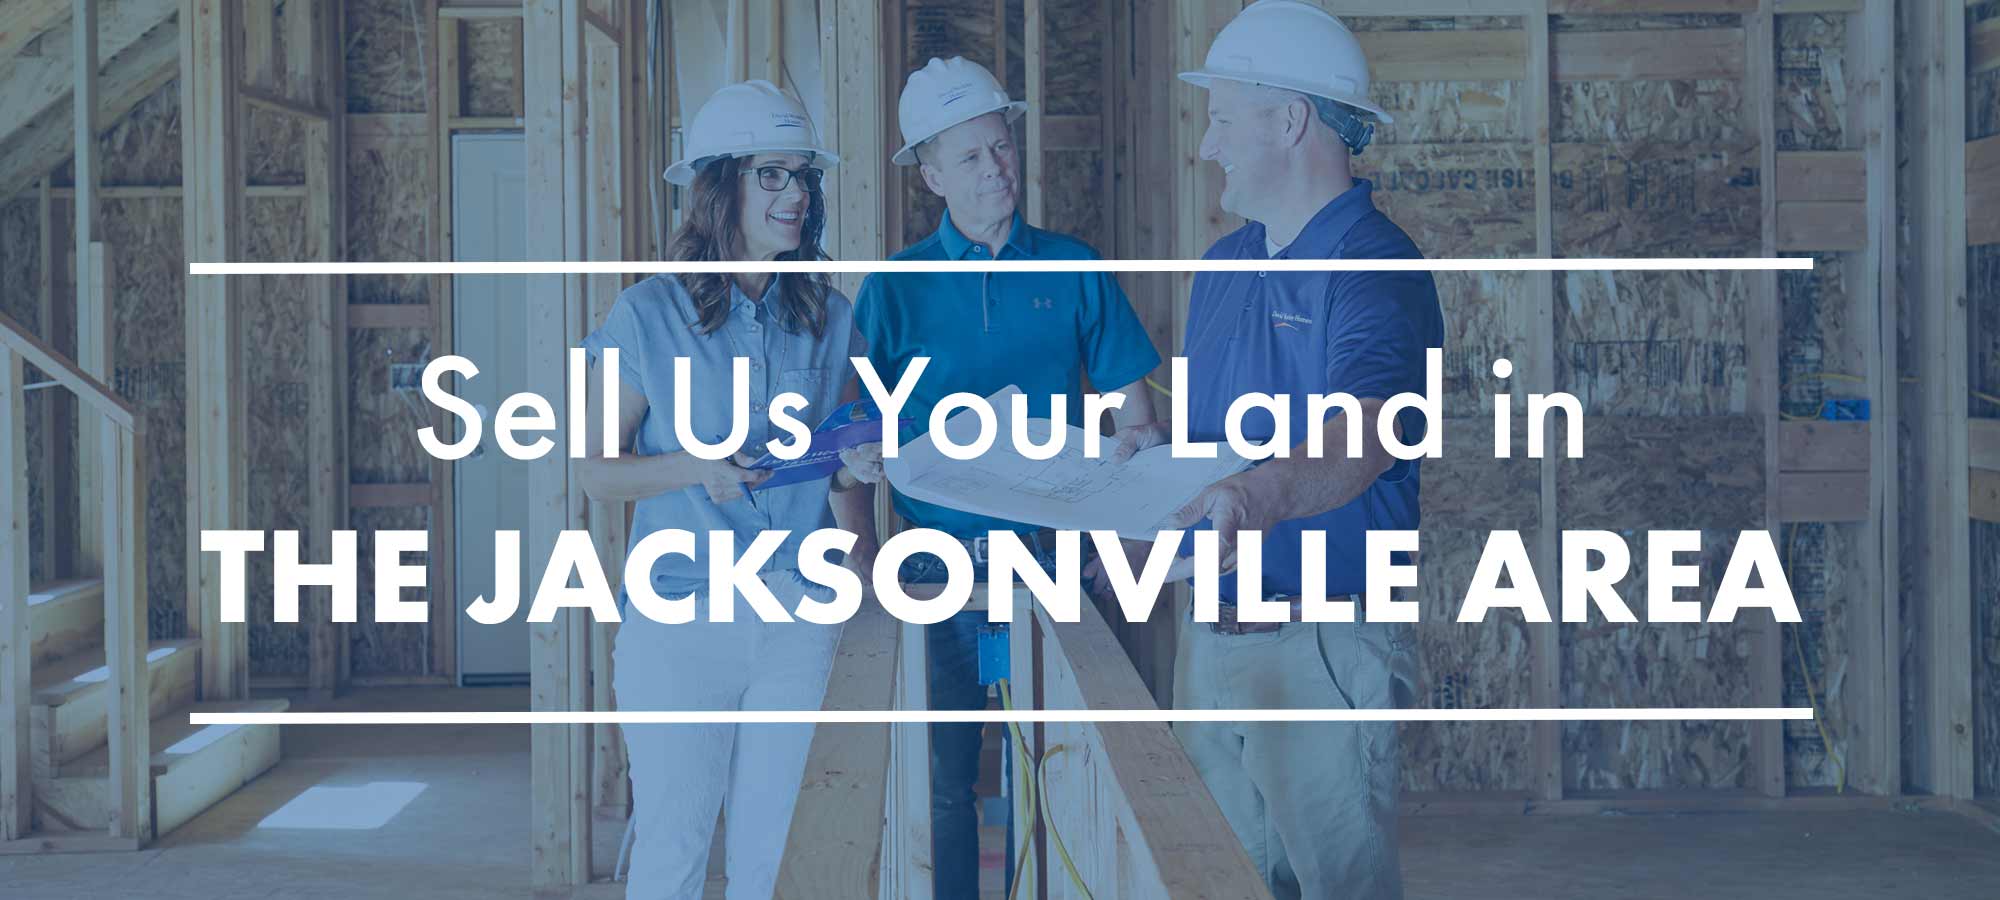 Sell Us Your Land in the Jacksonville Area